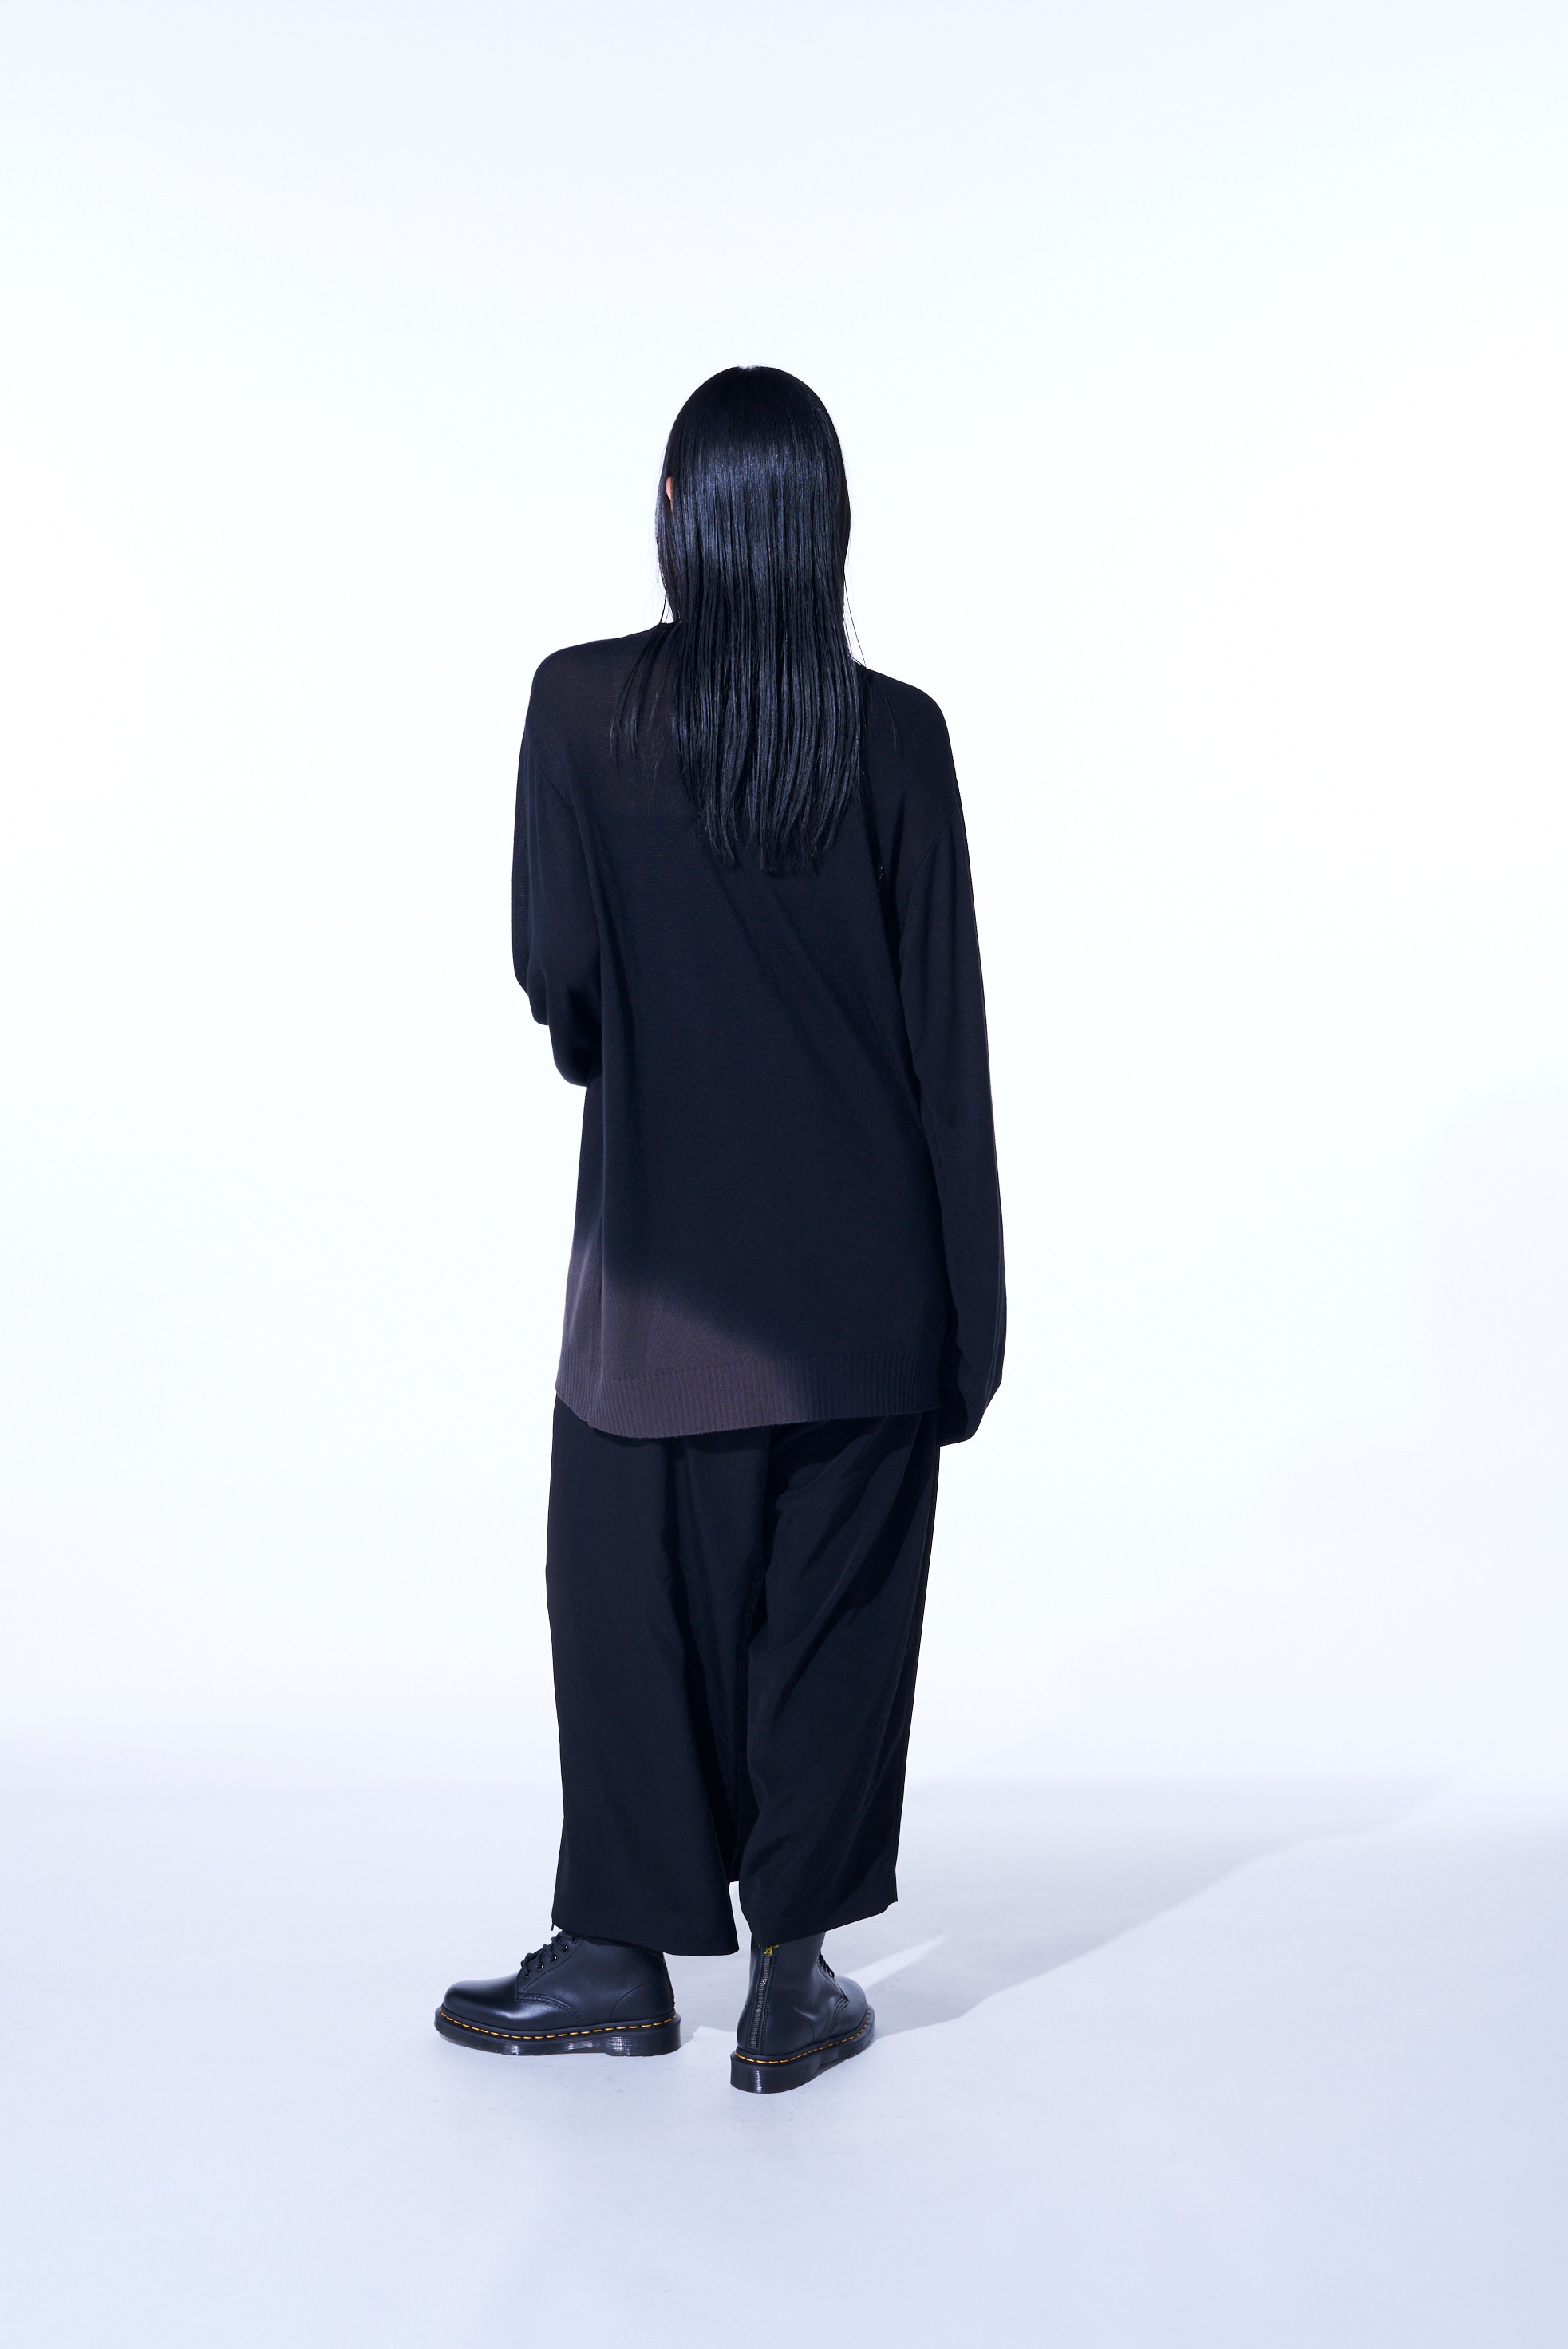 RY/SILK GRADATION PULLOVER KINT(M Black x Charcoal): S'YTE｜THE 